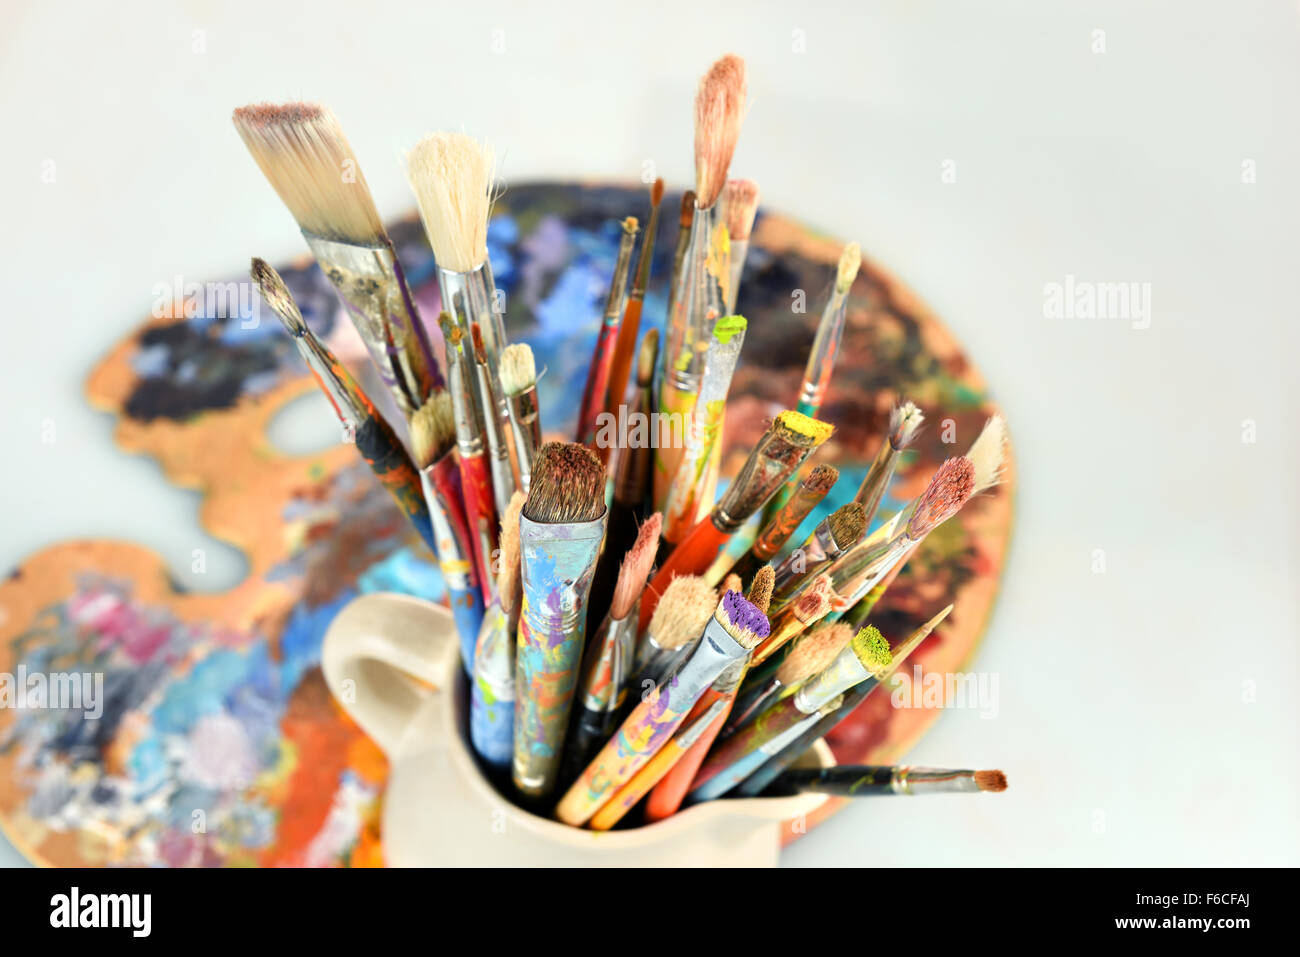 Artist paintbrushes and palette over light background Stock Photo